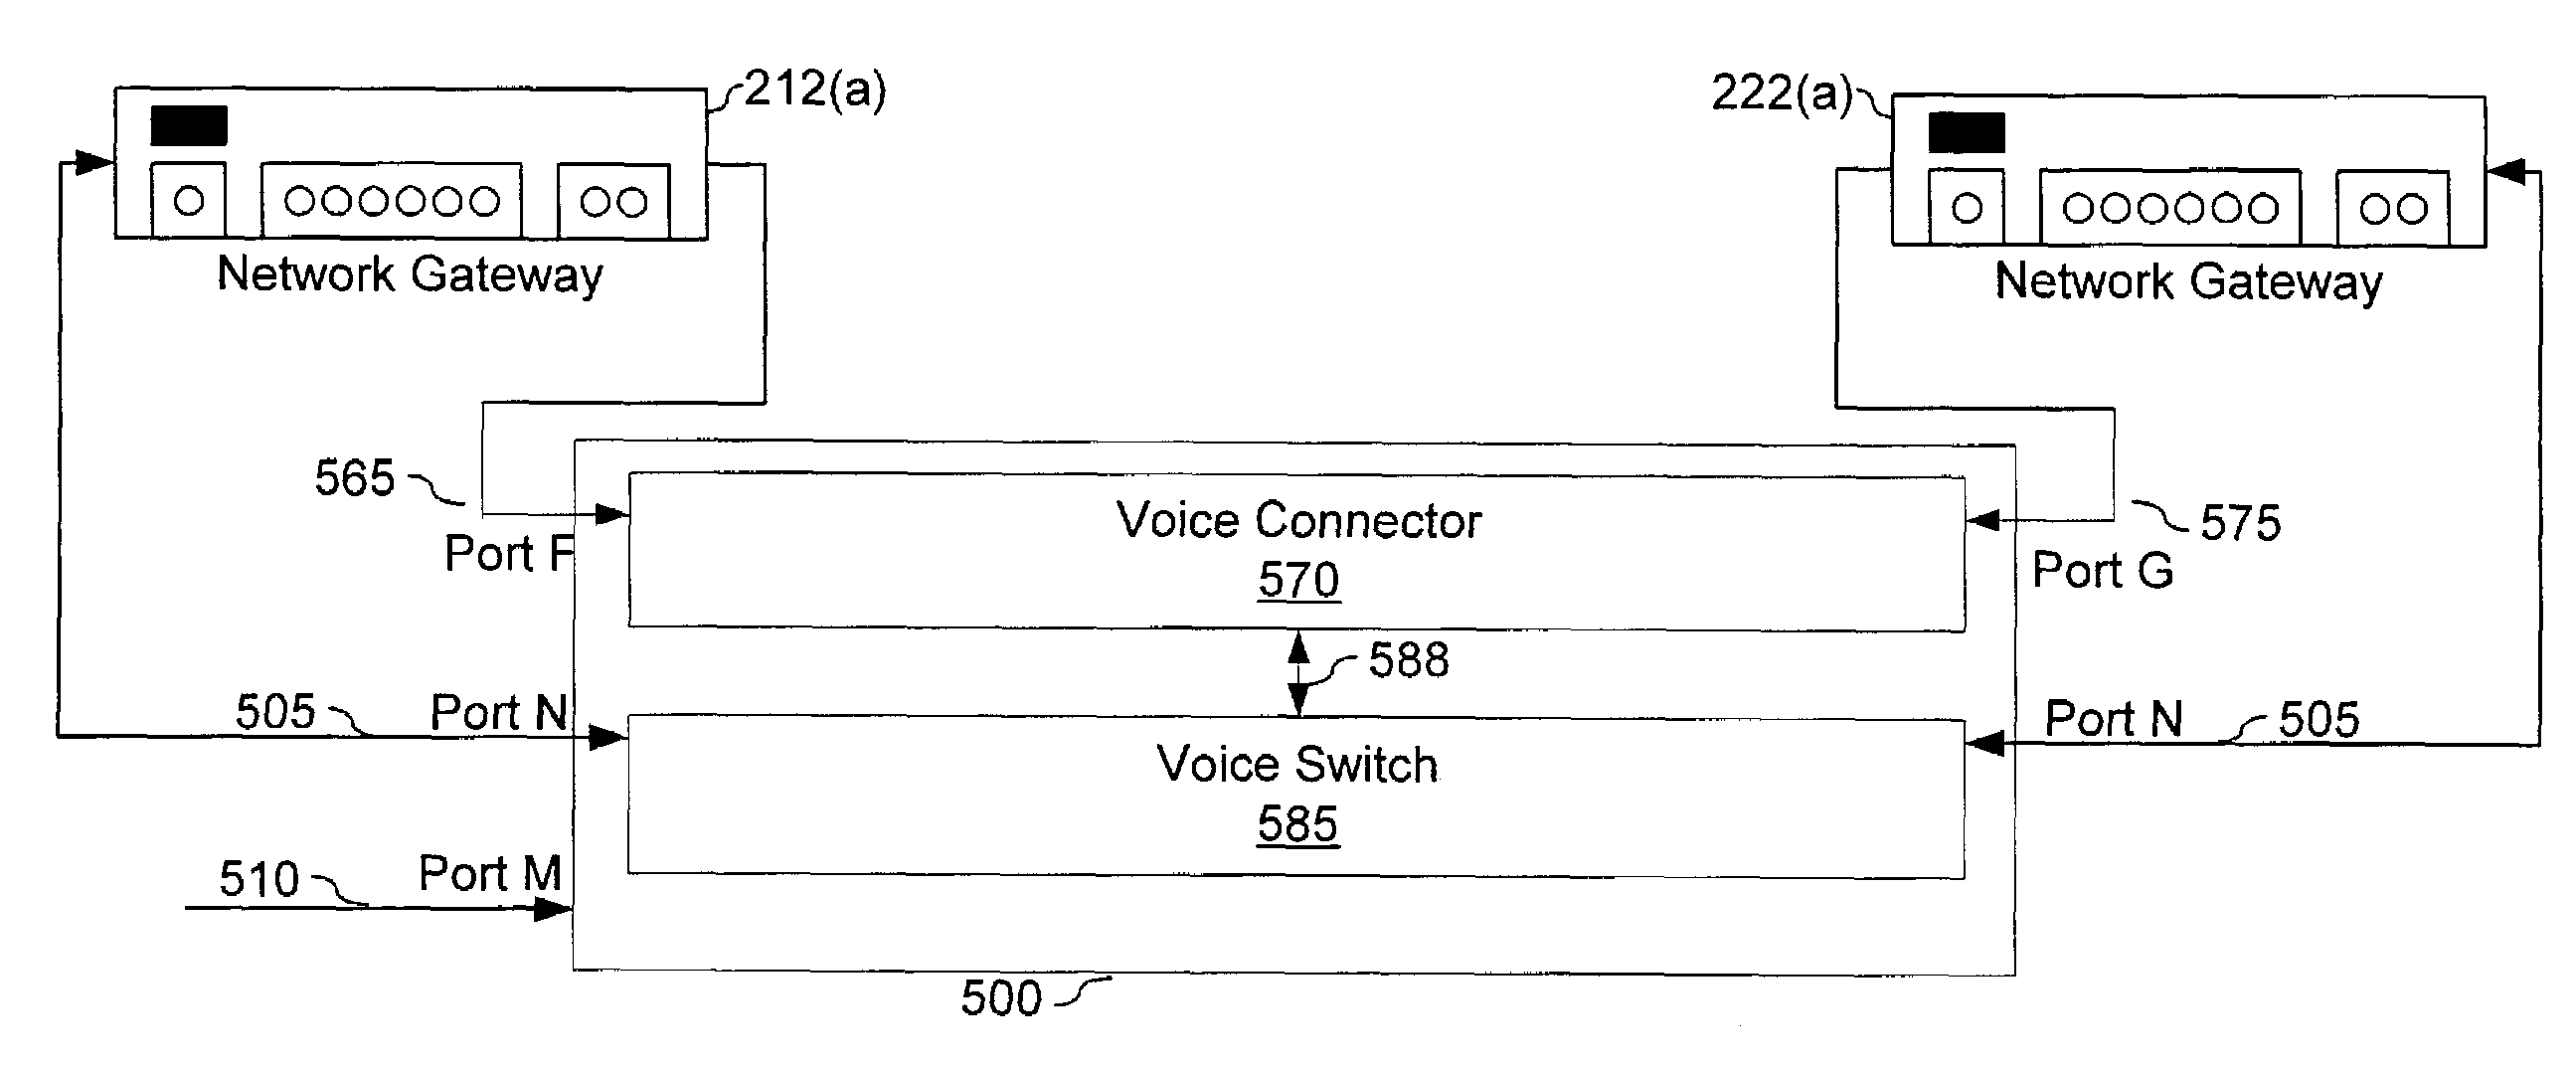 Network address translation for voice over internet protocol router